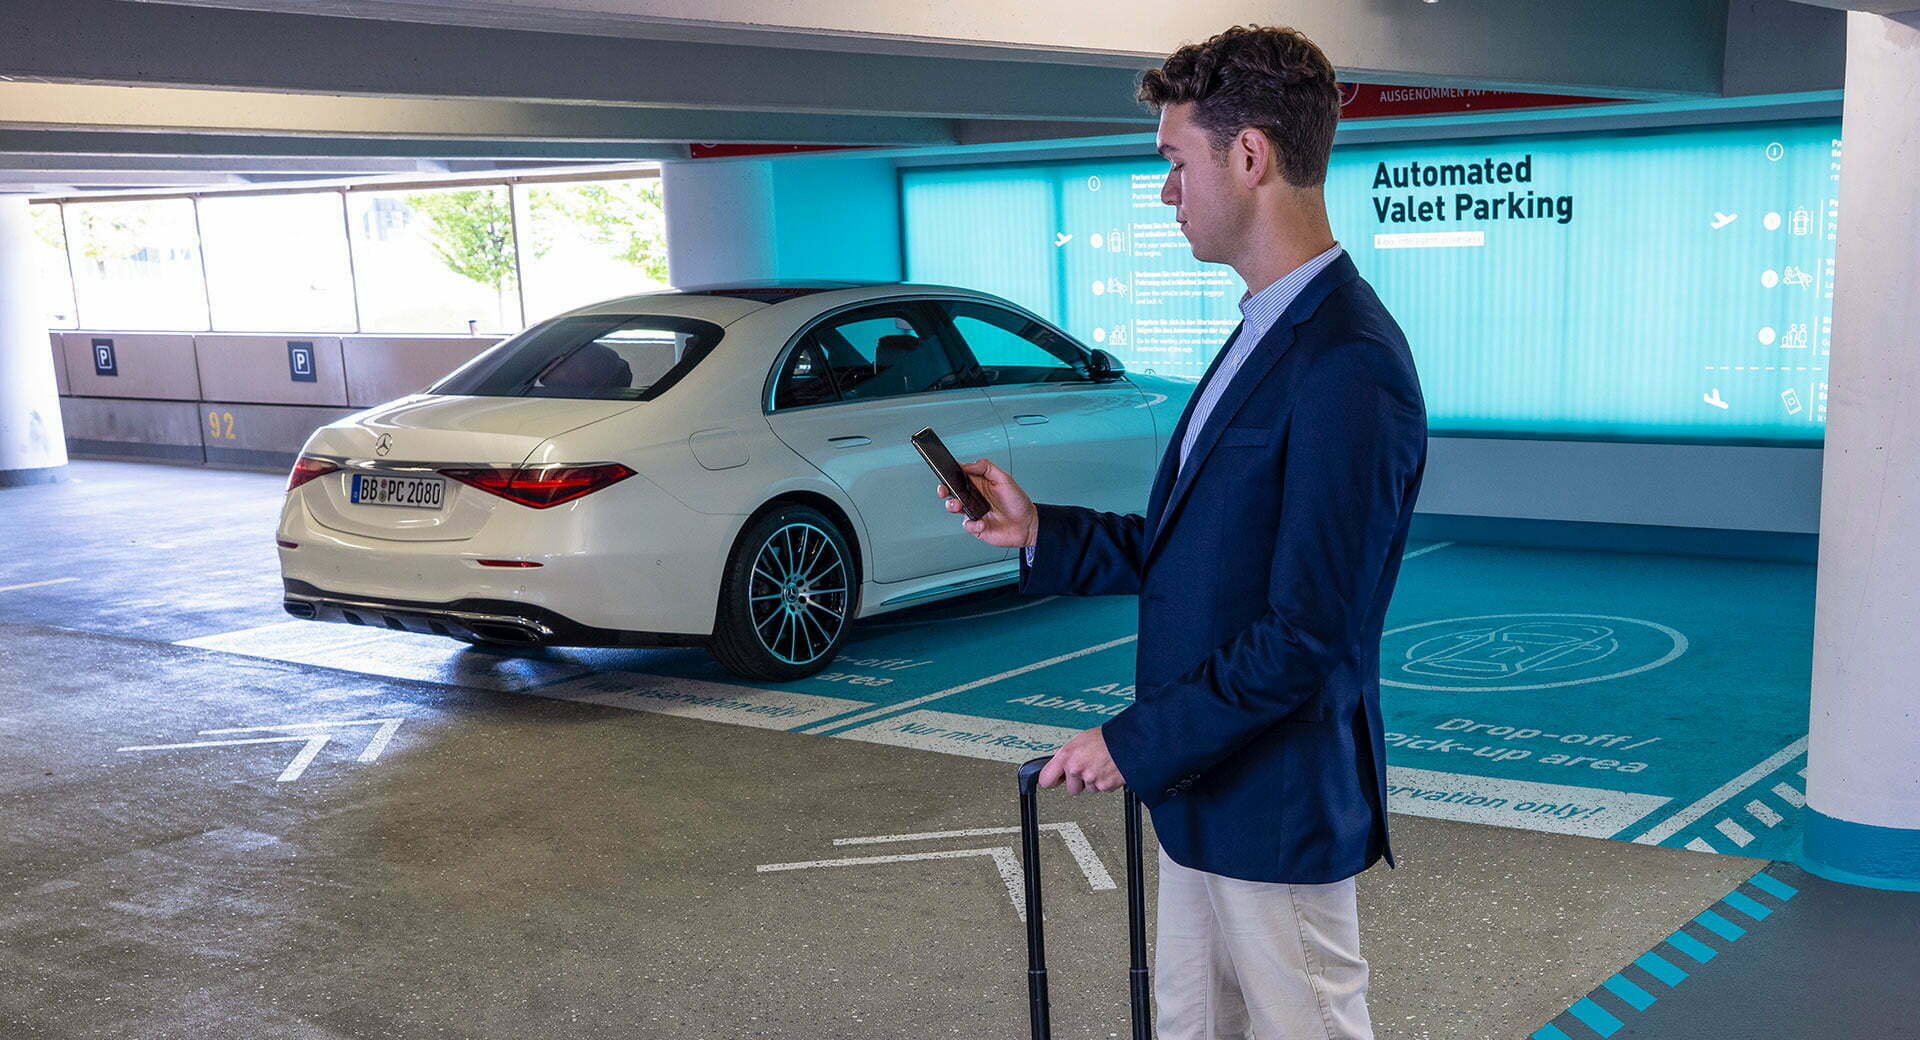 Mercedes Automated Parking